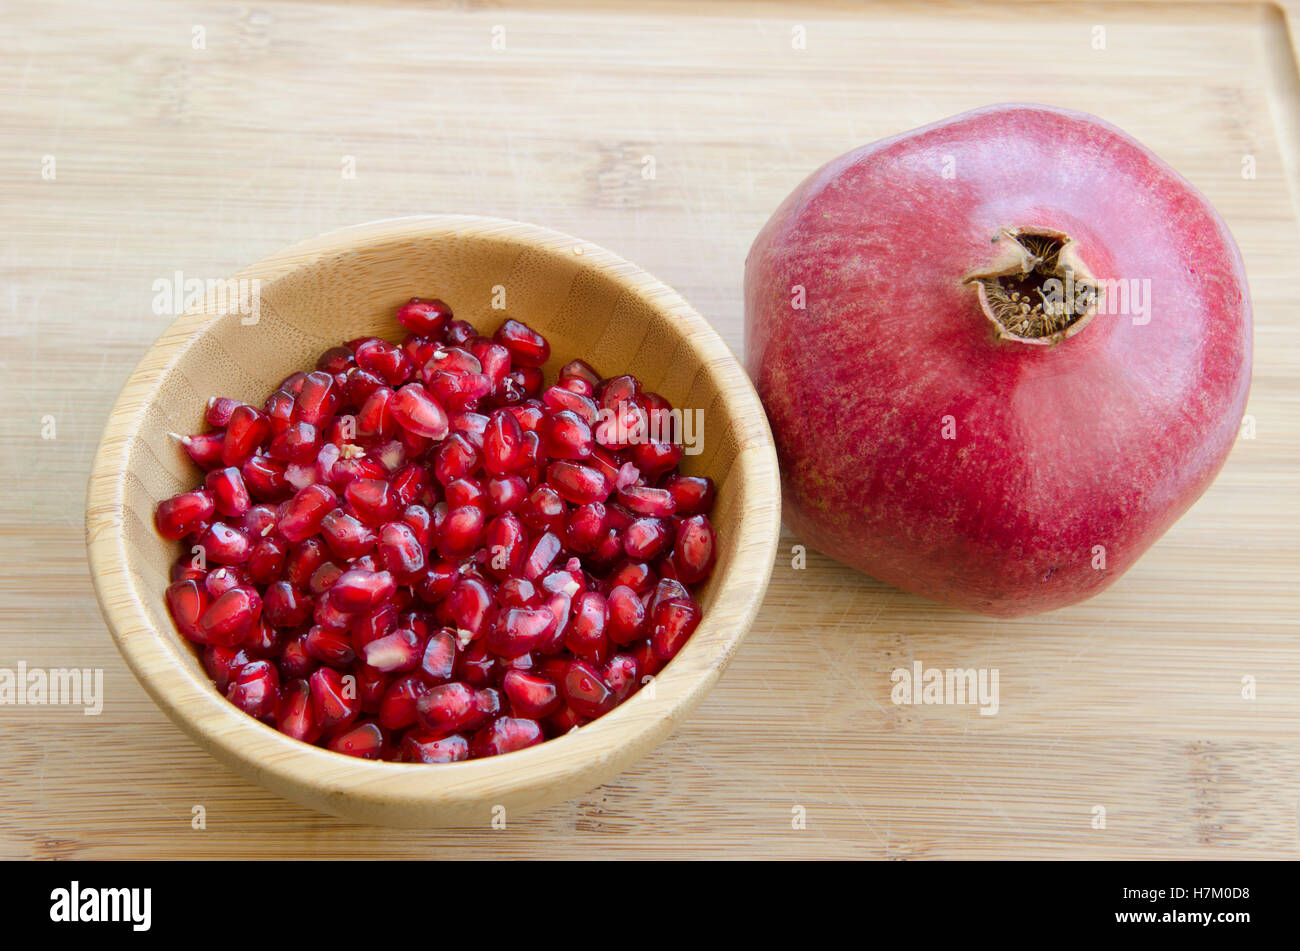 pomegranate fruit with seeds in wooden bowl on cutting board Stock Photo